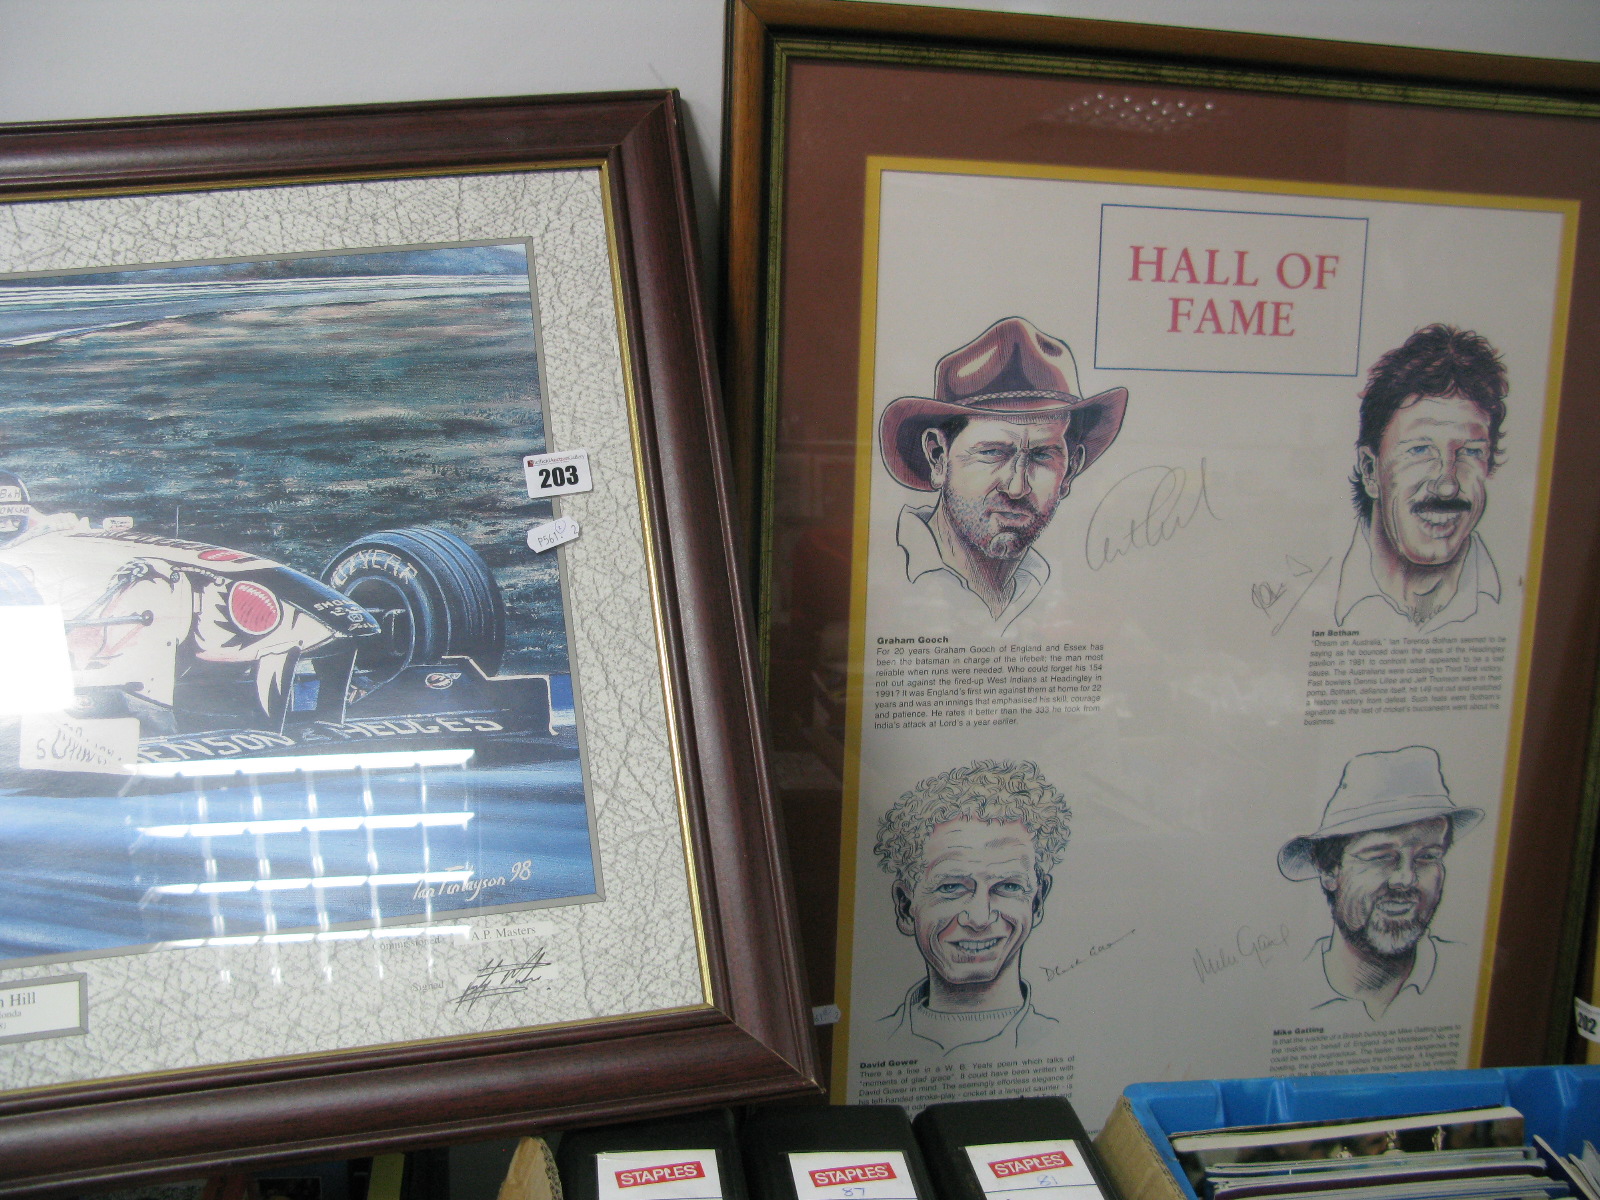 Cricket 'Hall of Fame' Limited Edition Print, of 300, produced by Dave Watson International,